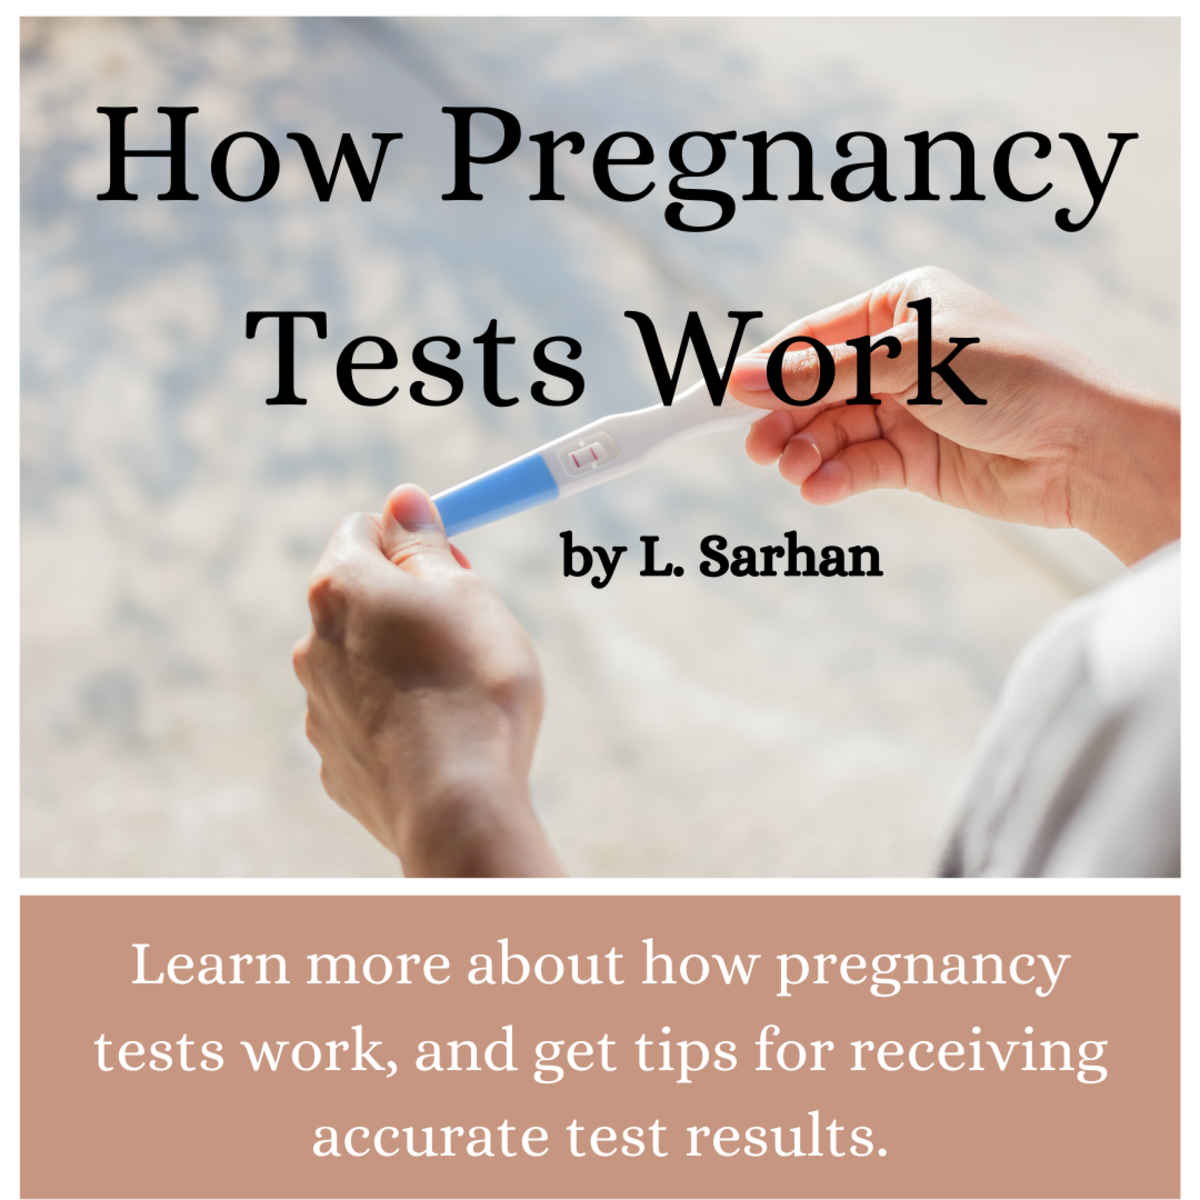 This article explains how pregnancy tests work and gives tips for receiving accurate test results.